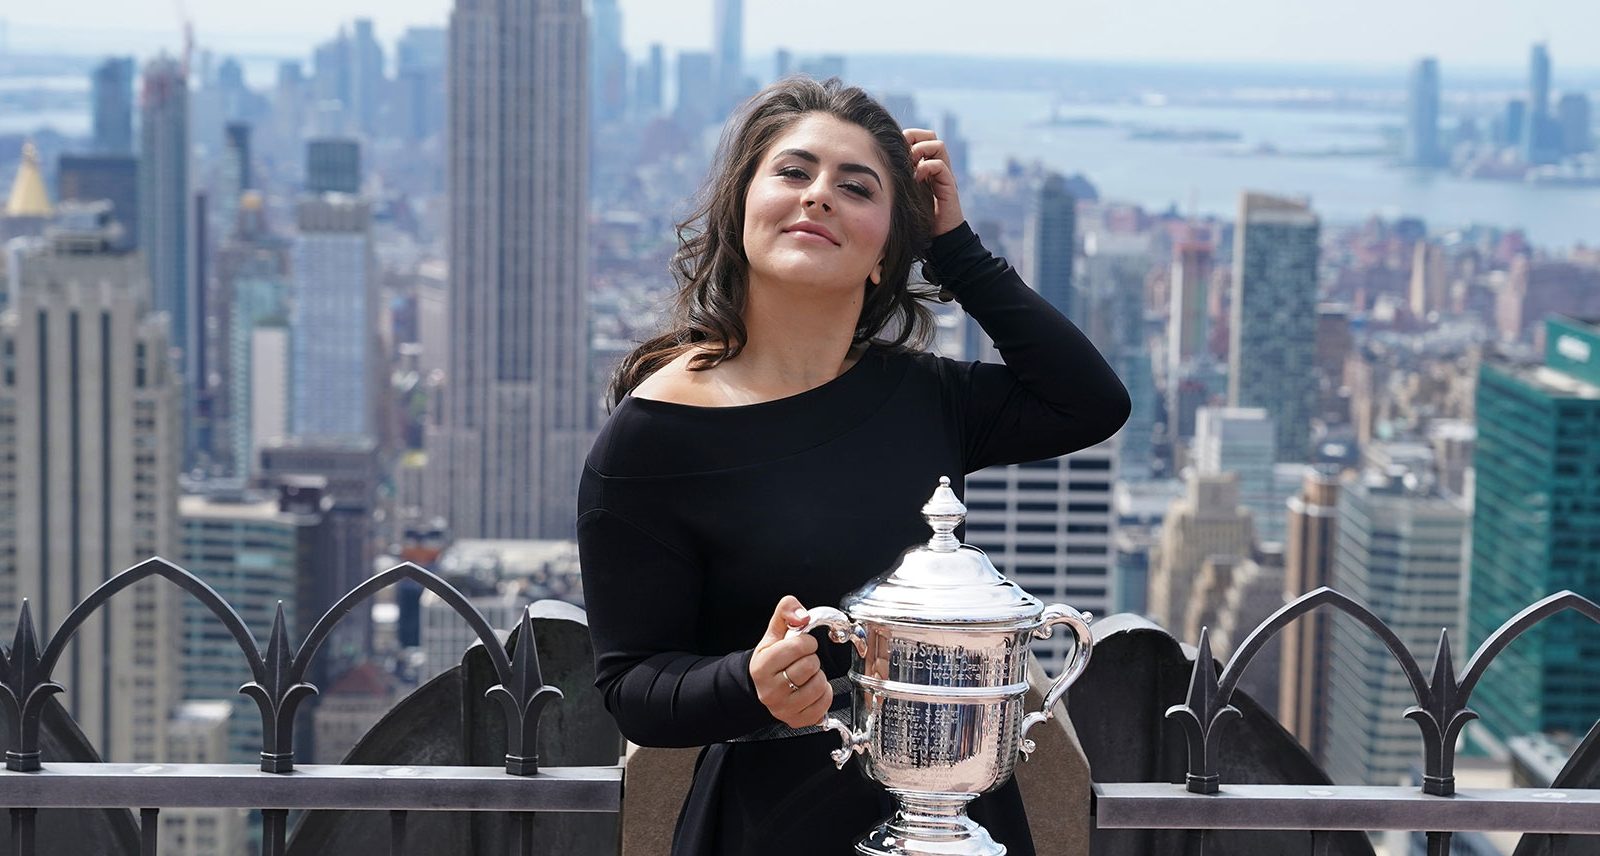 Bianca Andreescu Is Now Queen of the North, and She’s Getting All the Praise